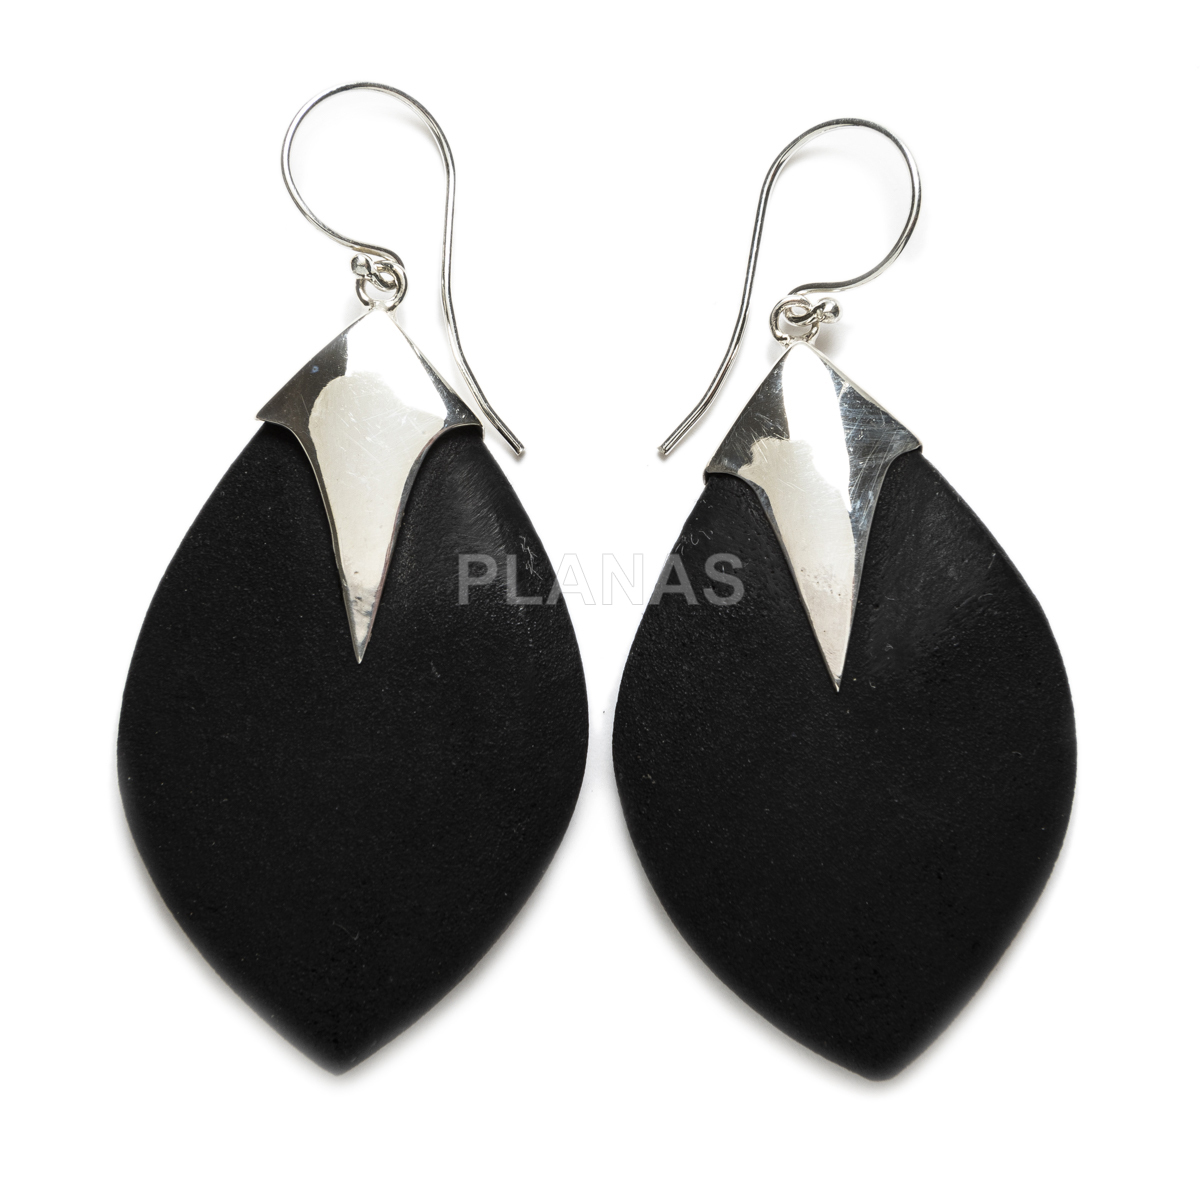 Earrings in sterling silver and volcanic lava.